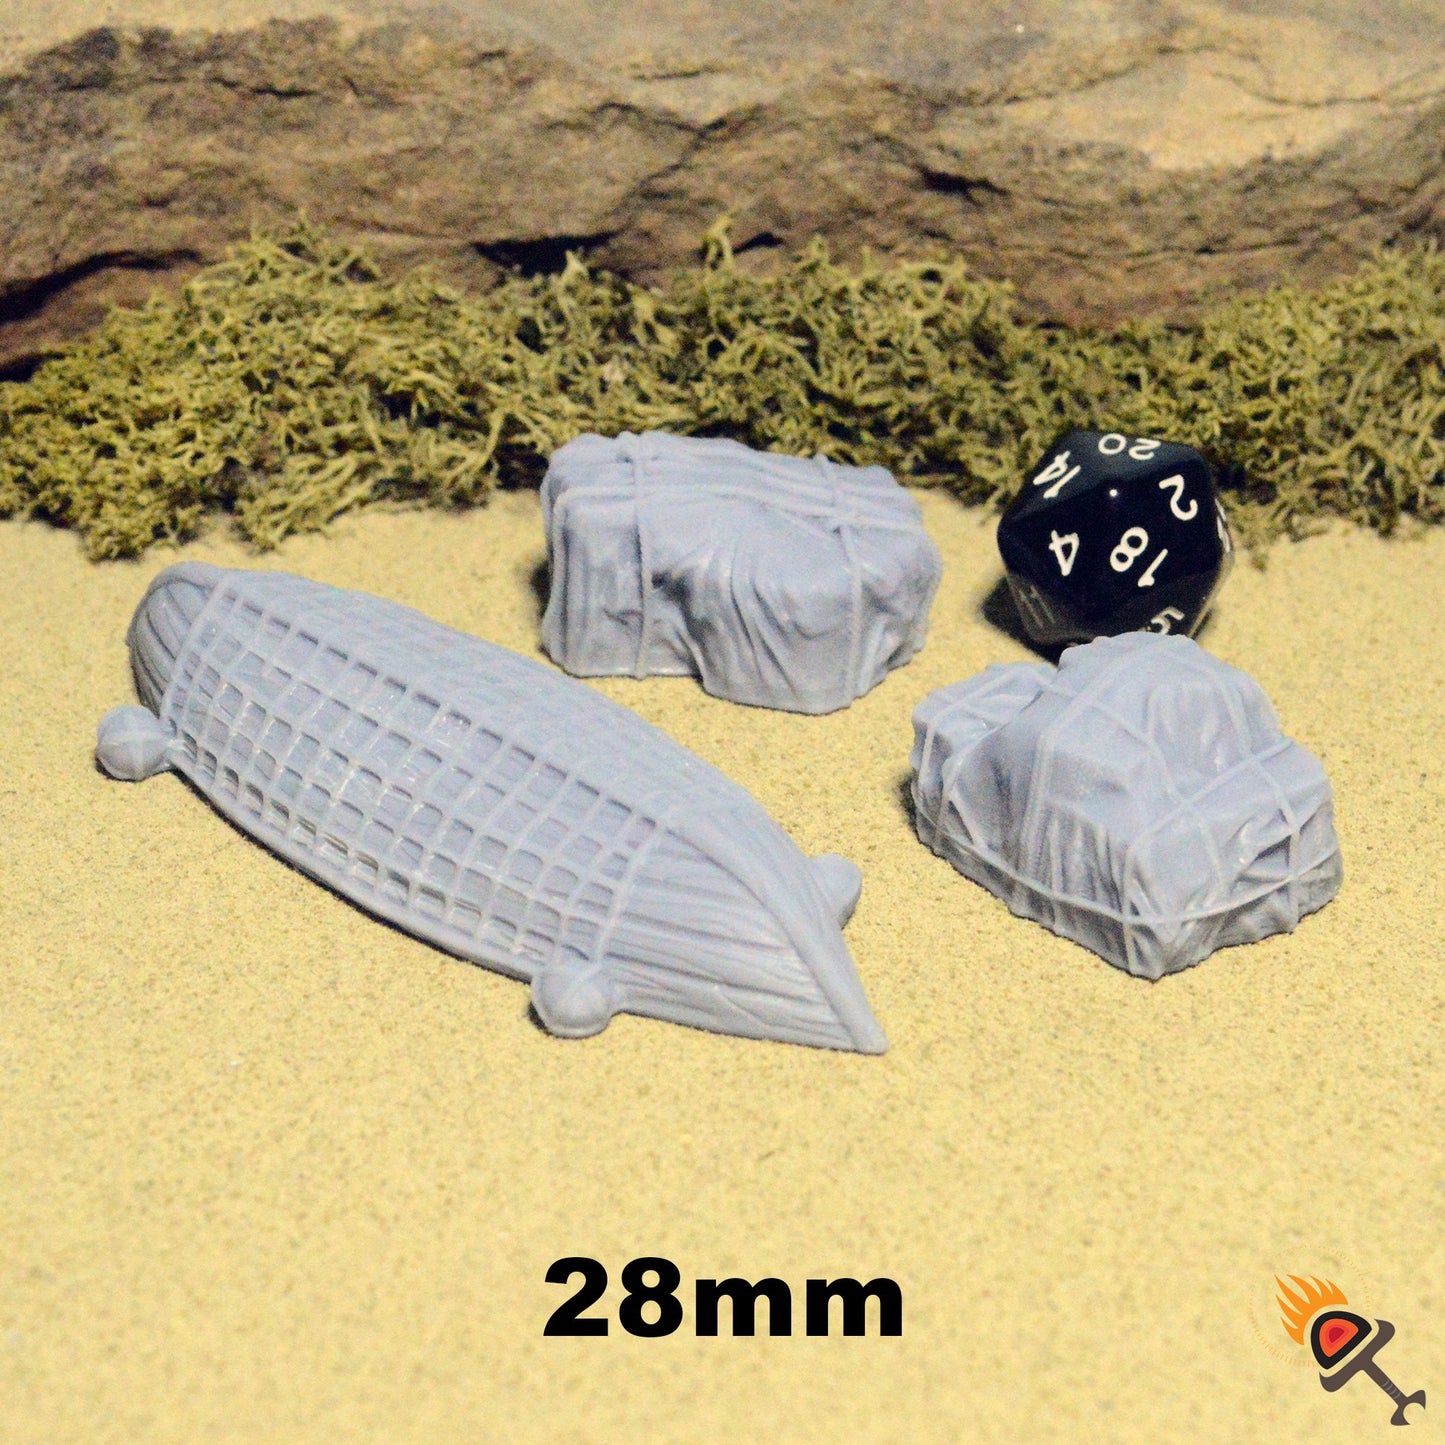 Flipped Fishing Boat and Tarped Cargo 15mm 28mm 32mm for D&D Terrain, DnD Pathfinder Pirate Coastal